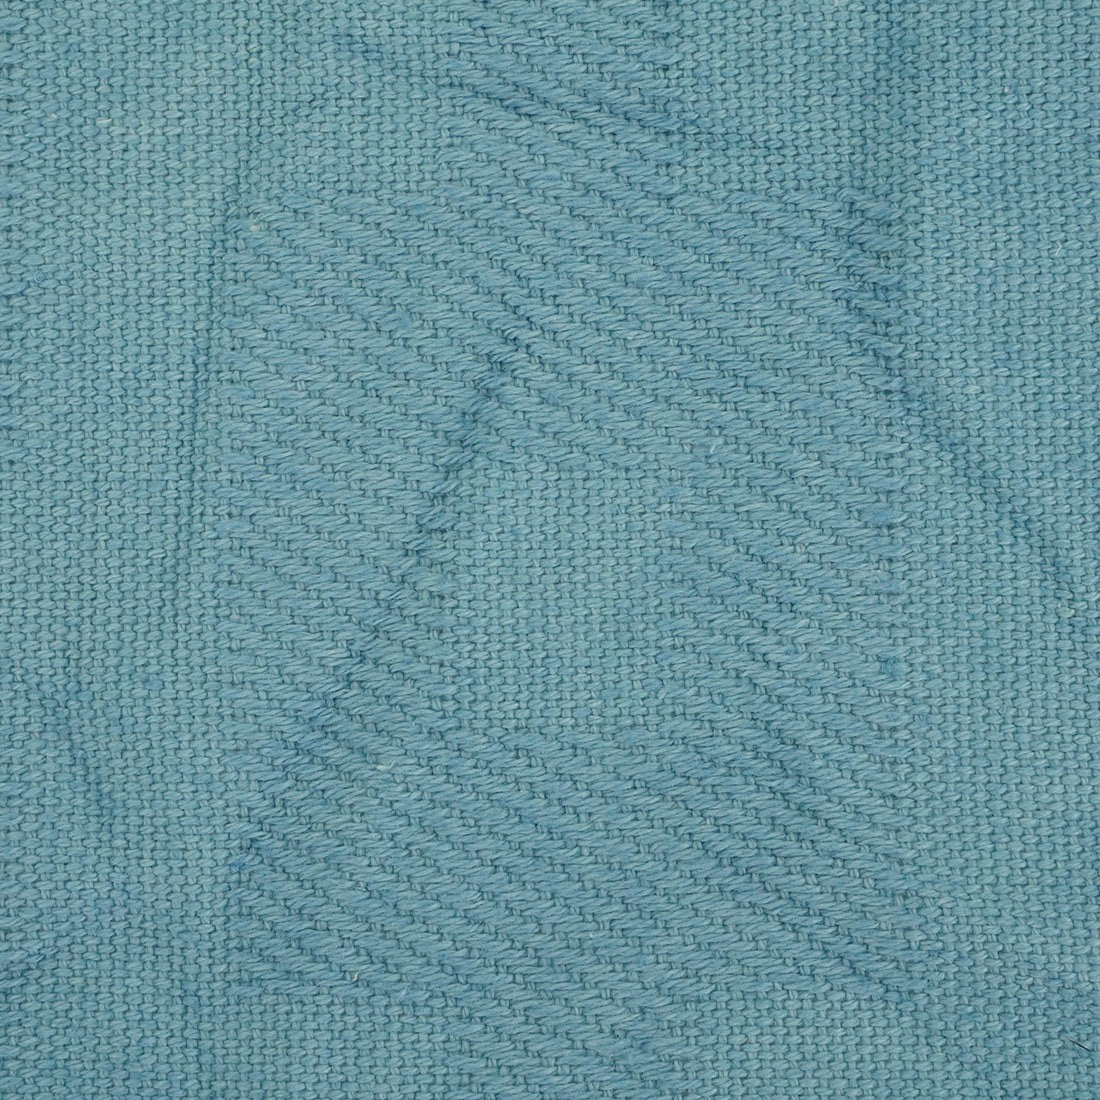 Recycled Surgical Towels Mixed Zoom 3 View